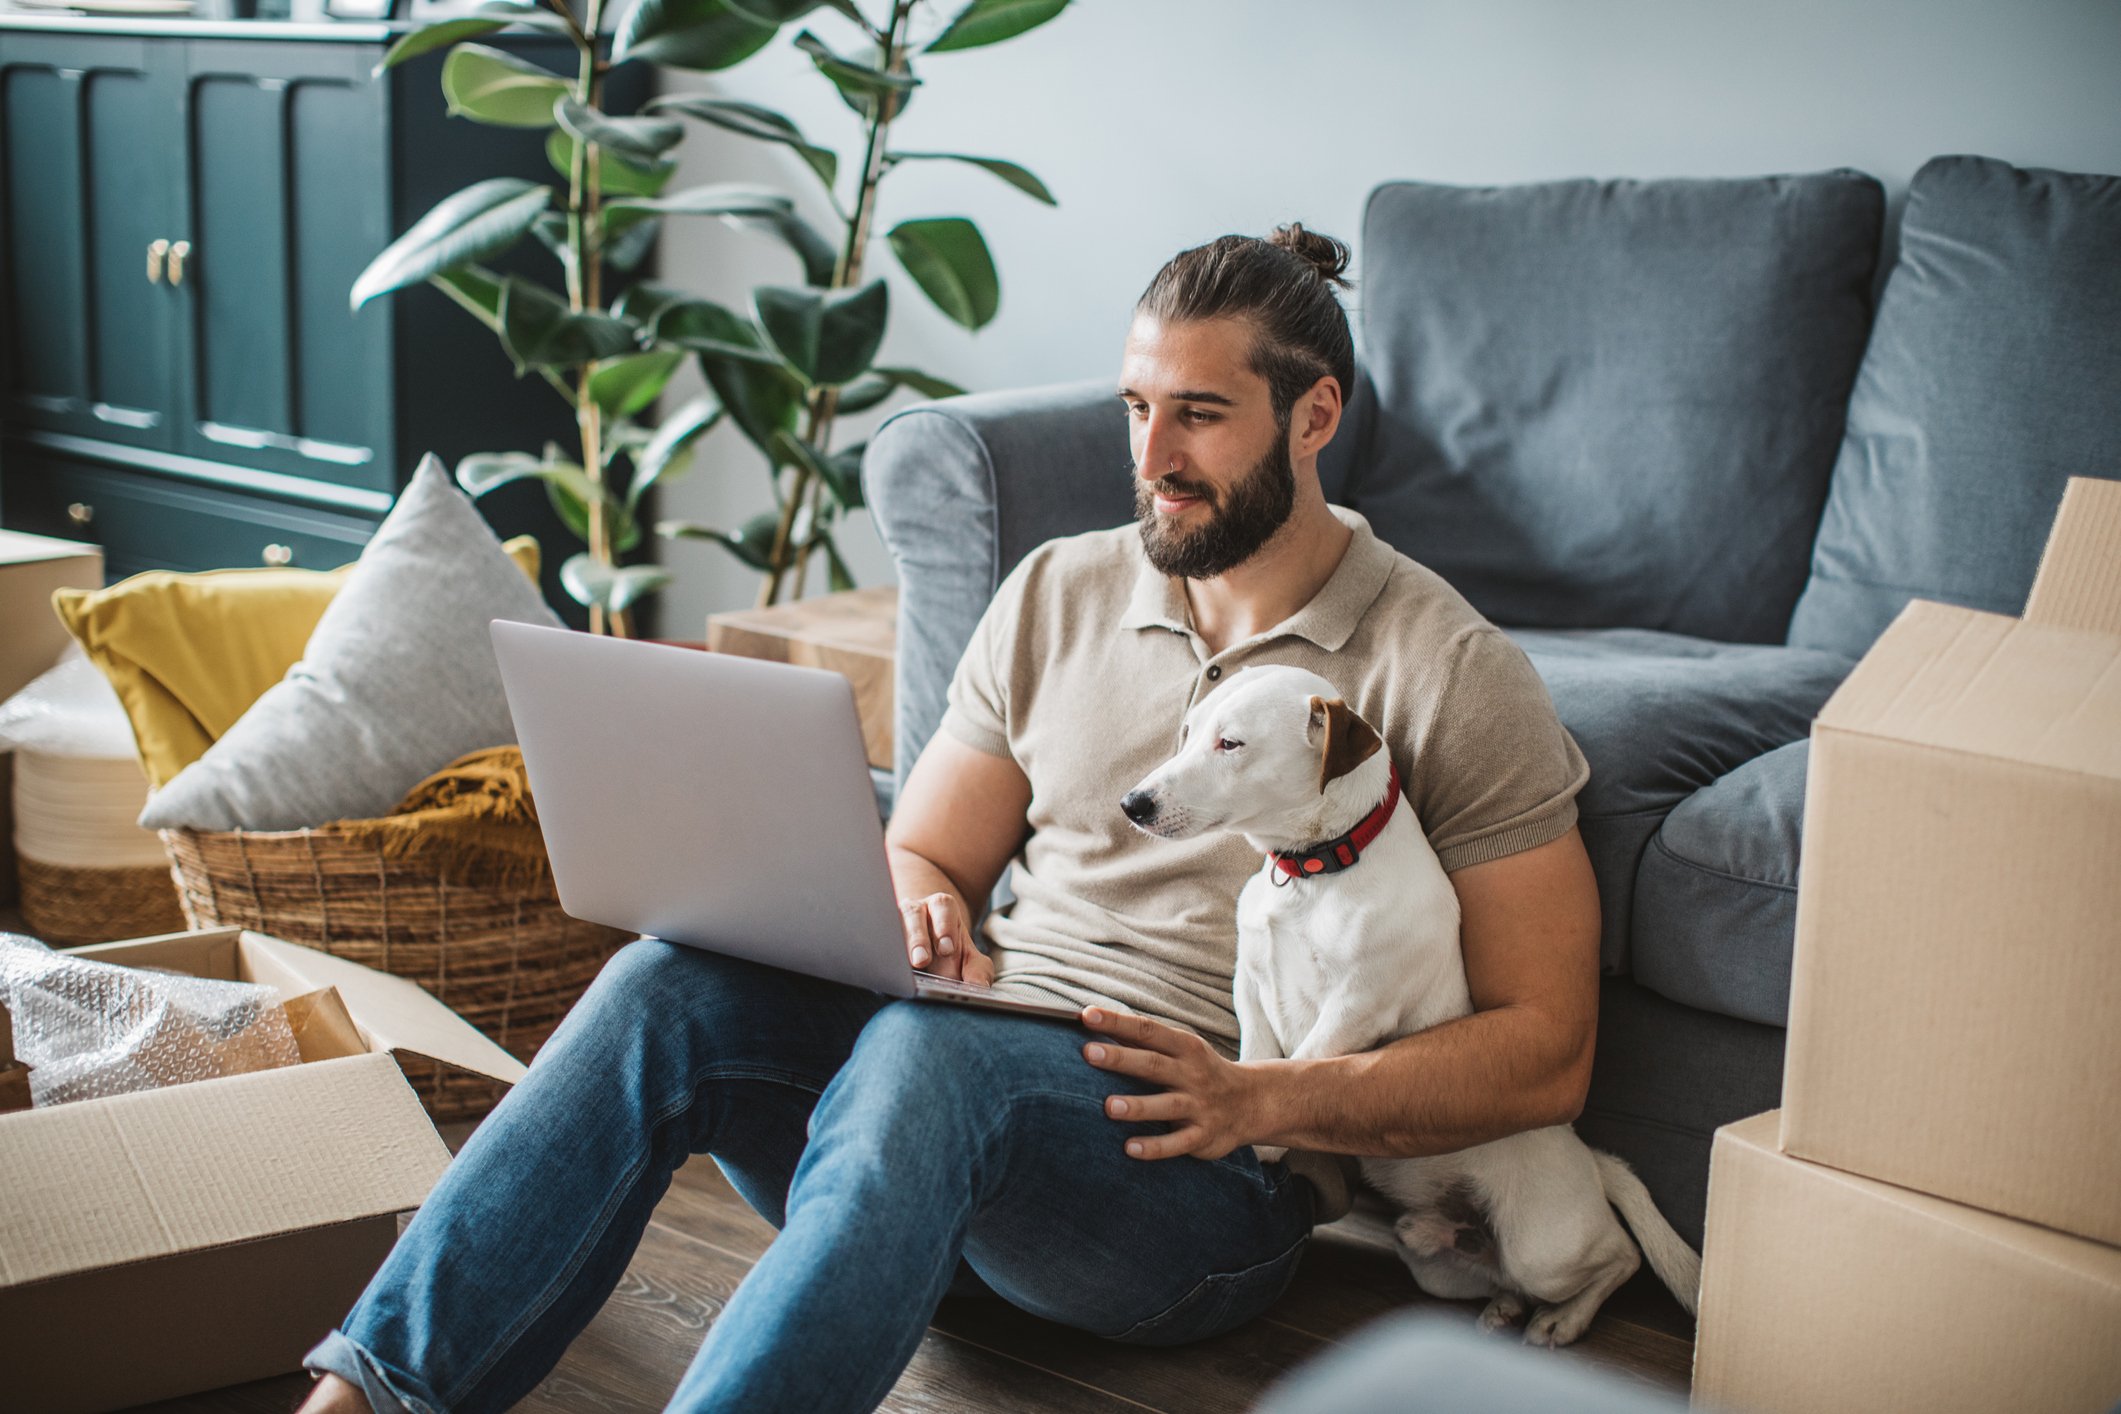 Man with dog on laptop in new home